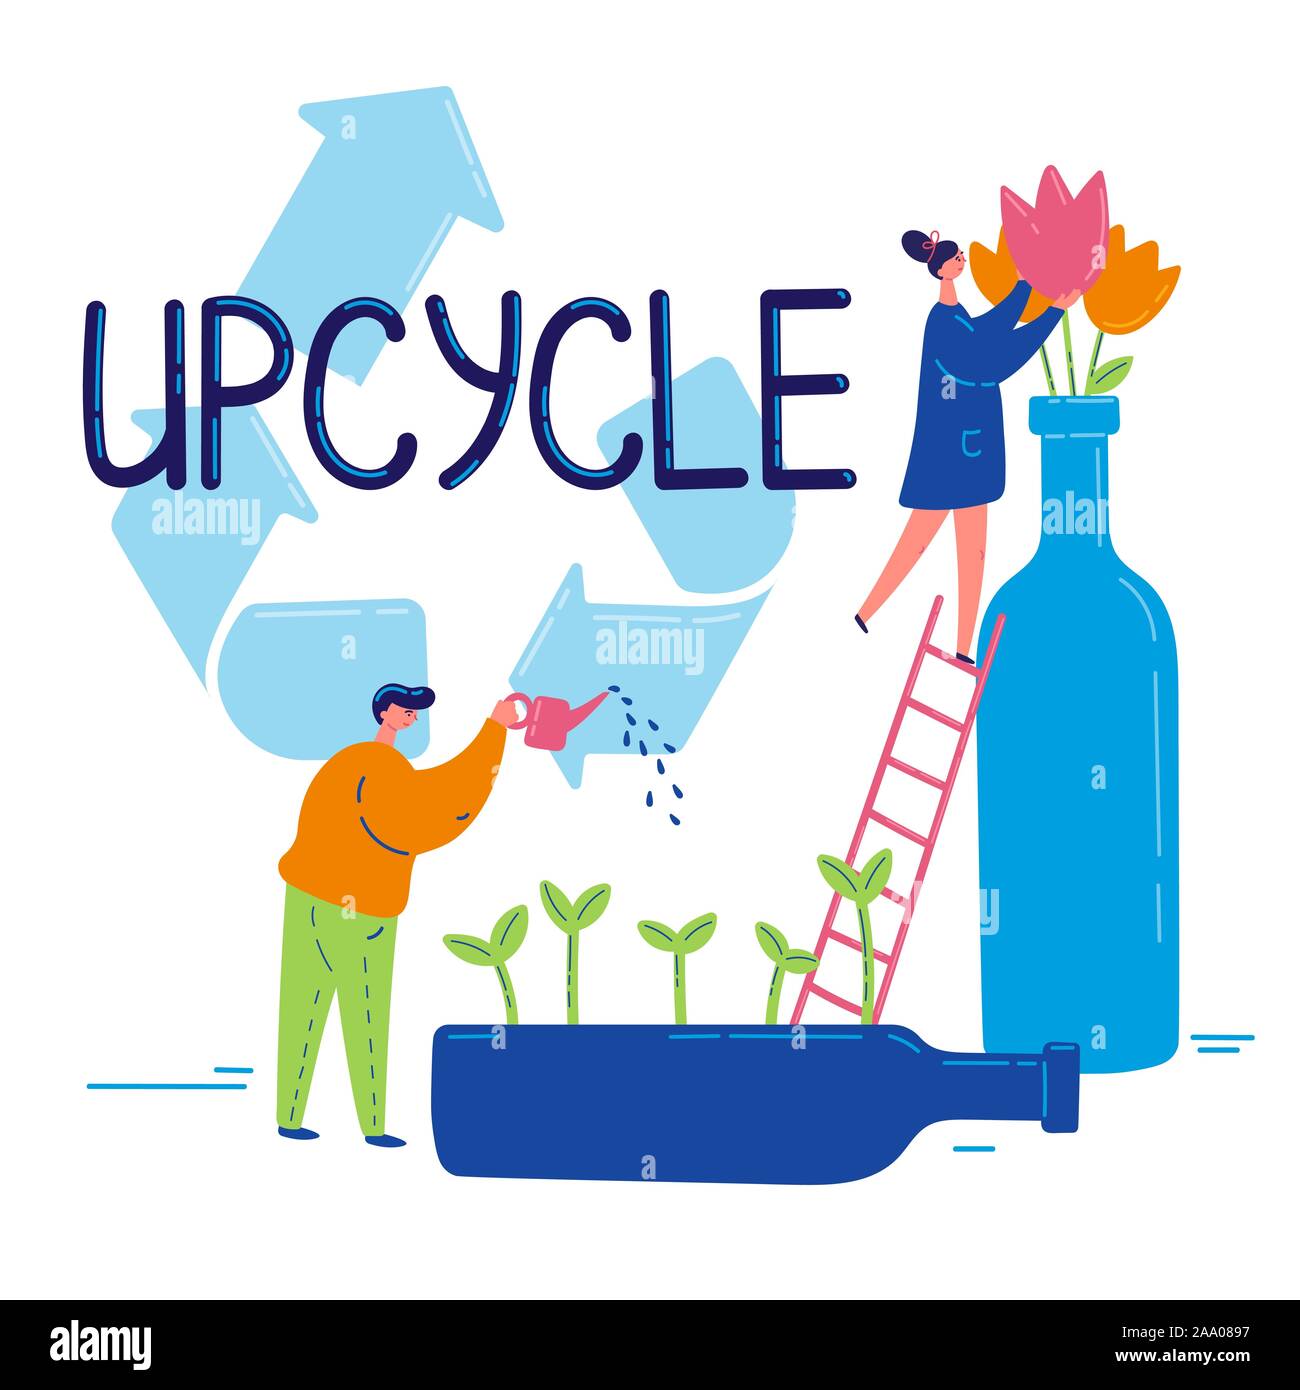 Upcycle concept.Glass upcycle.Vector illustration Stock Vector